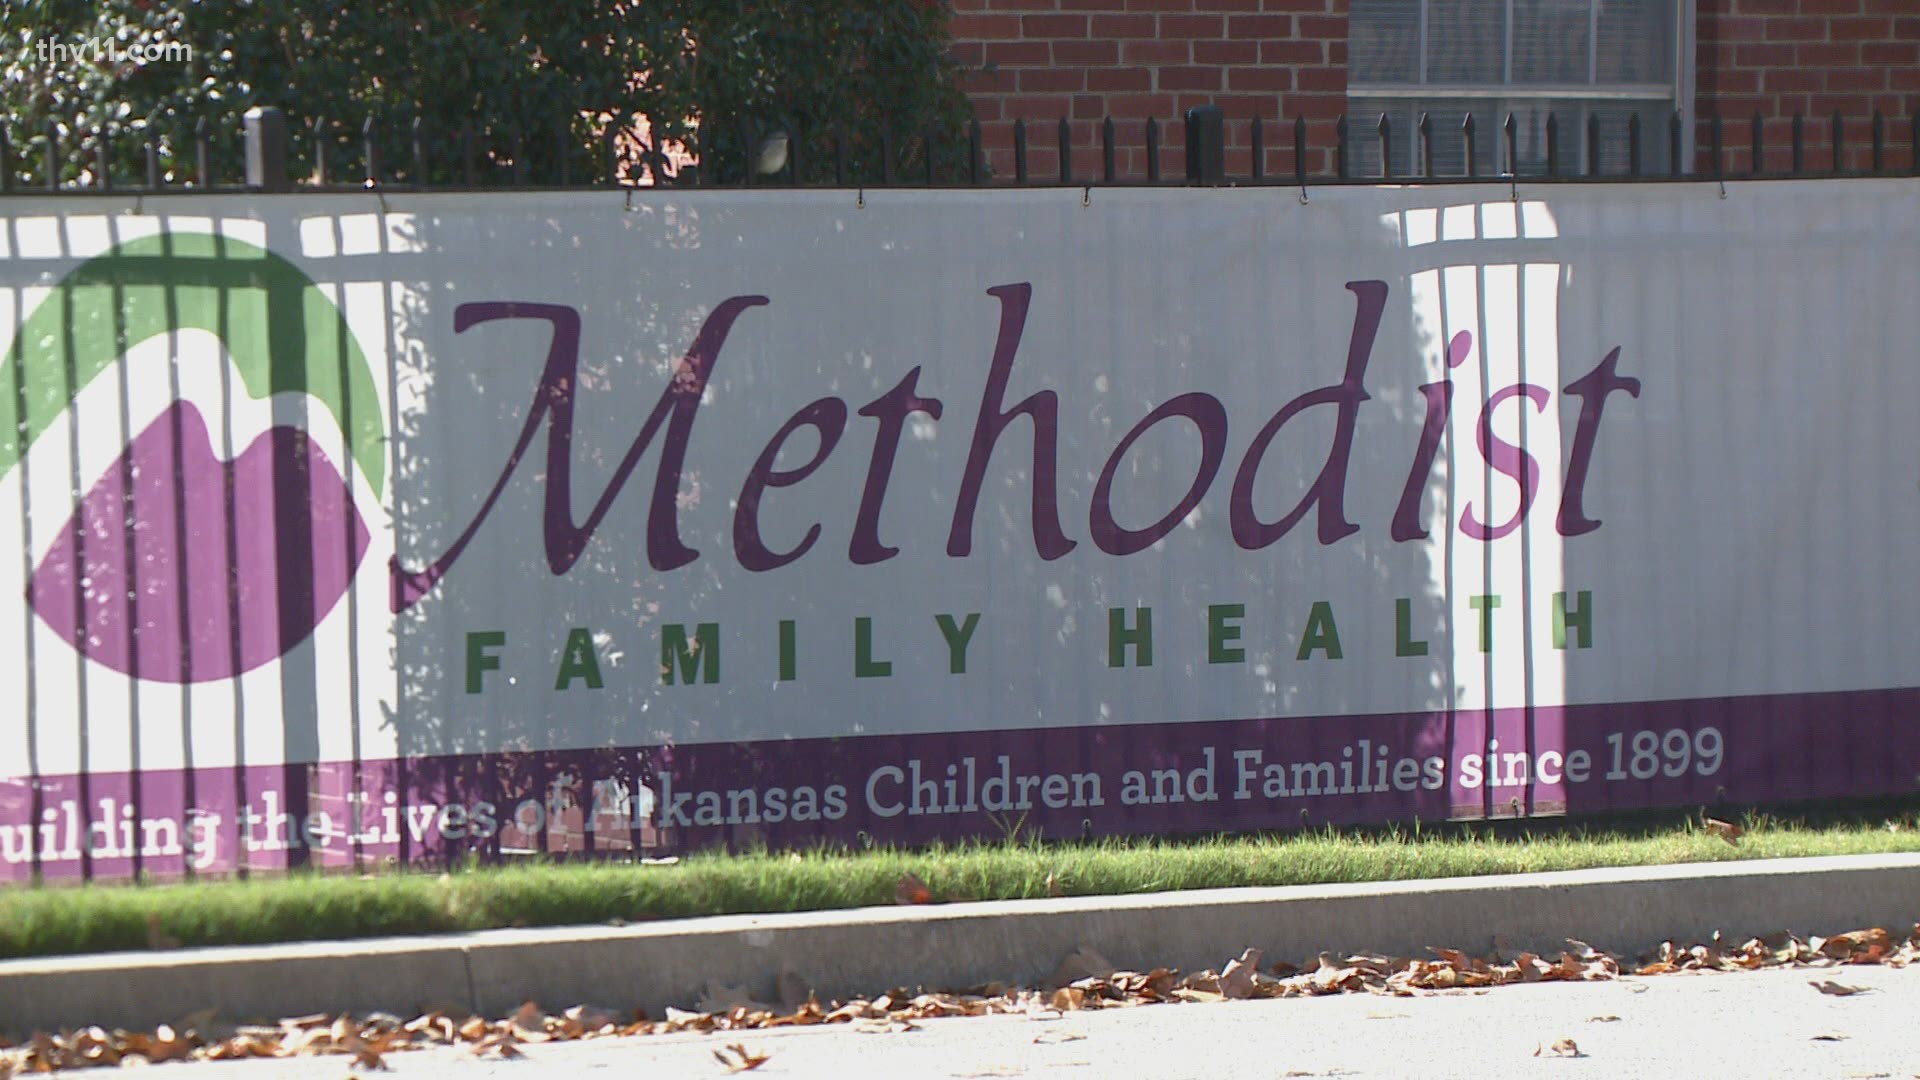 Methodist Family Health in Arkansas is notifying certain individuals about a ransomware attack in which protected health information was breached.